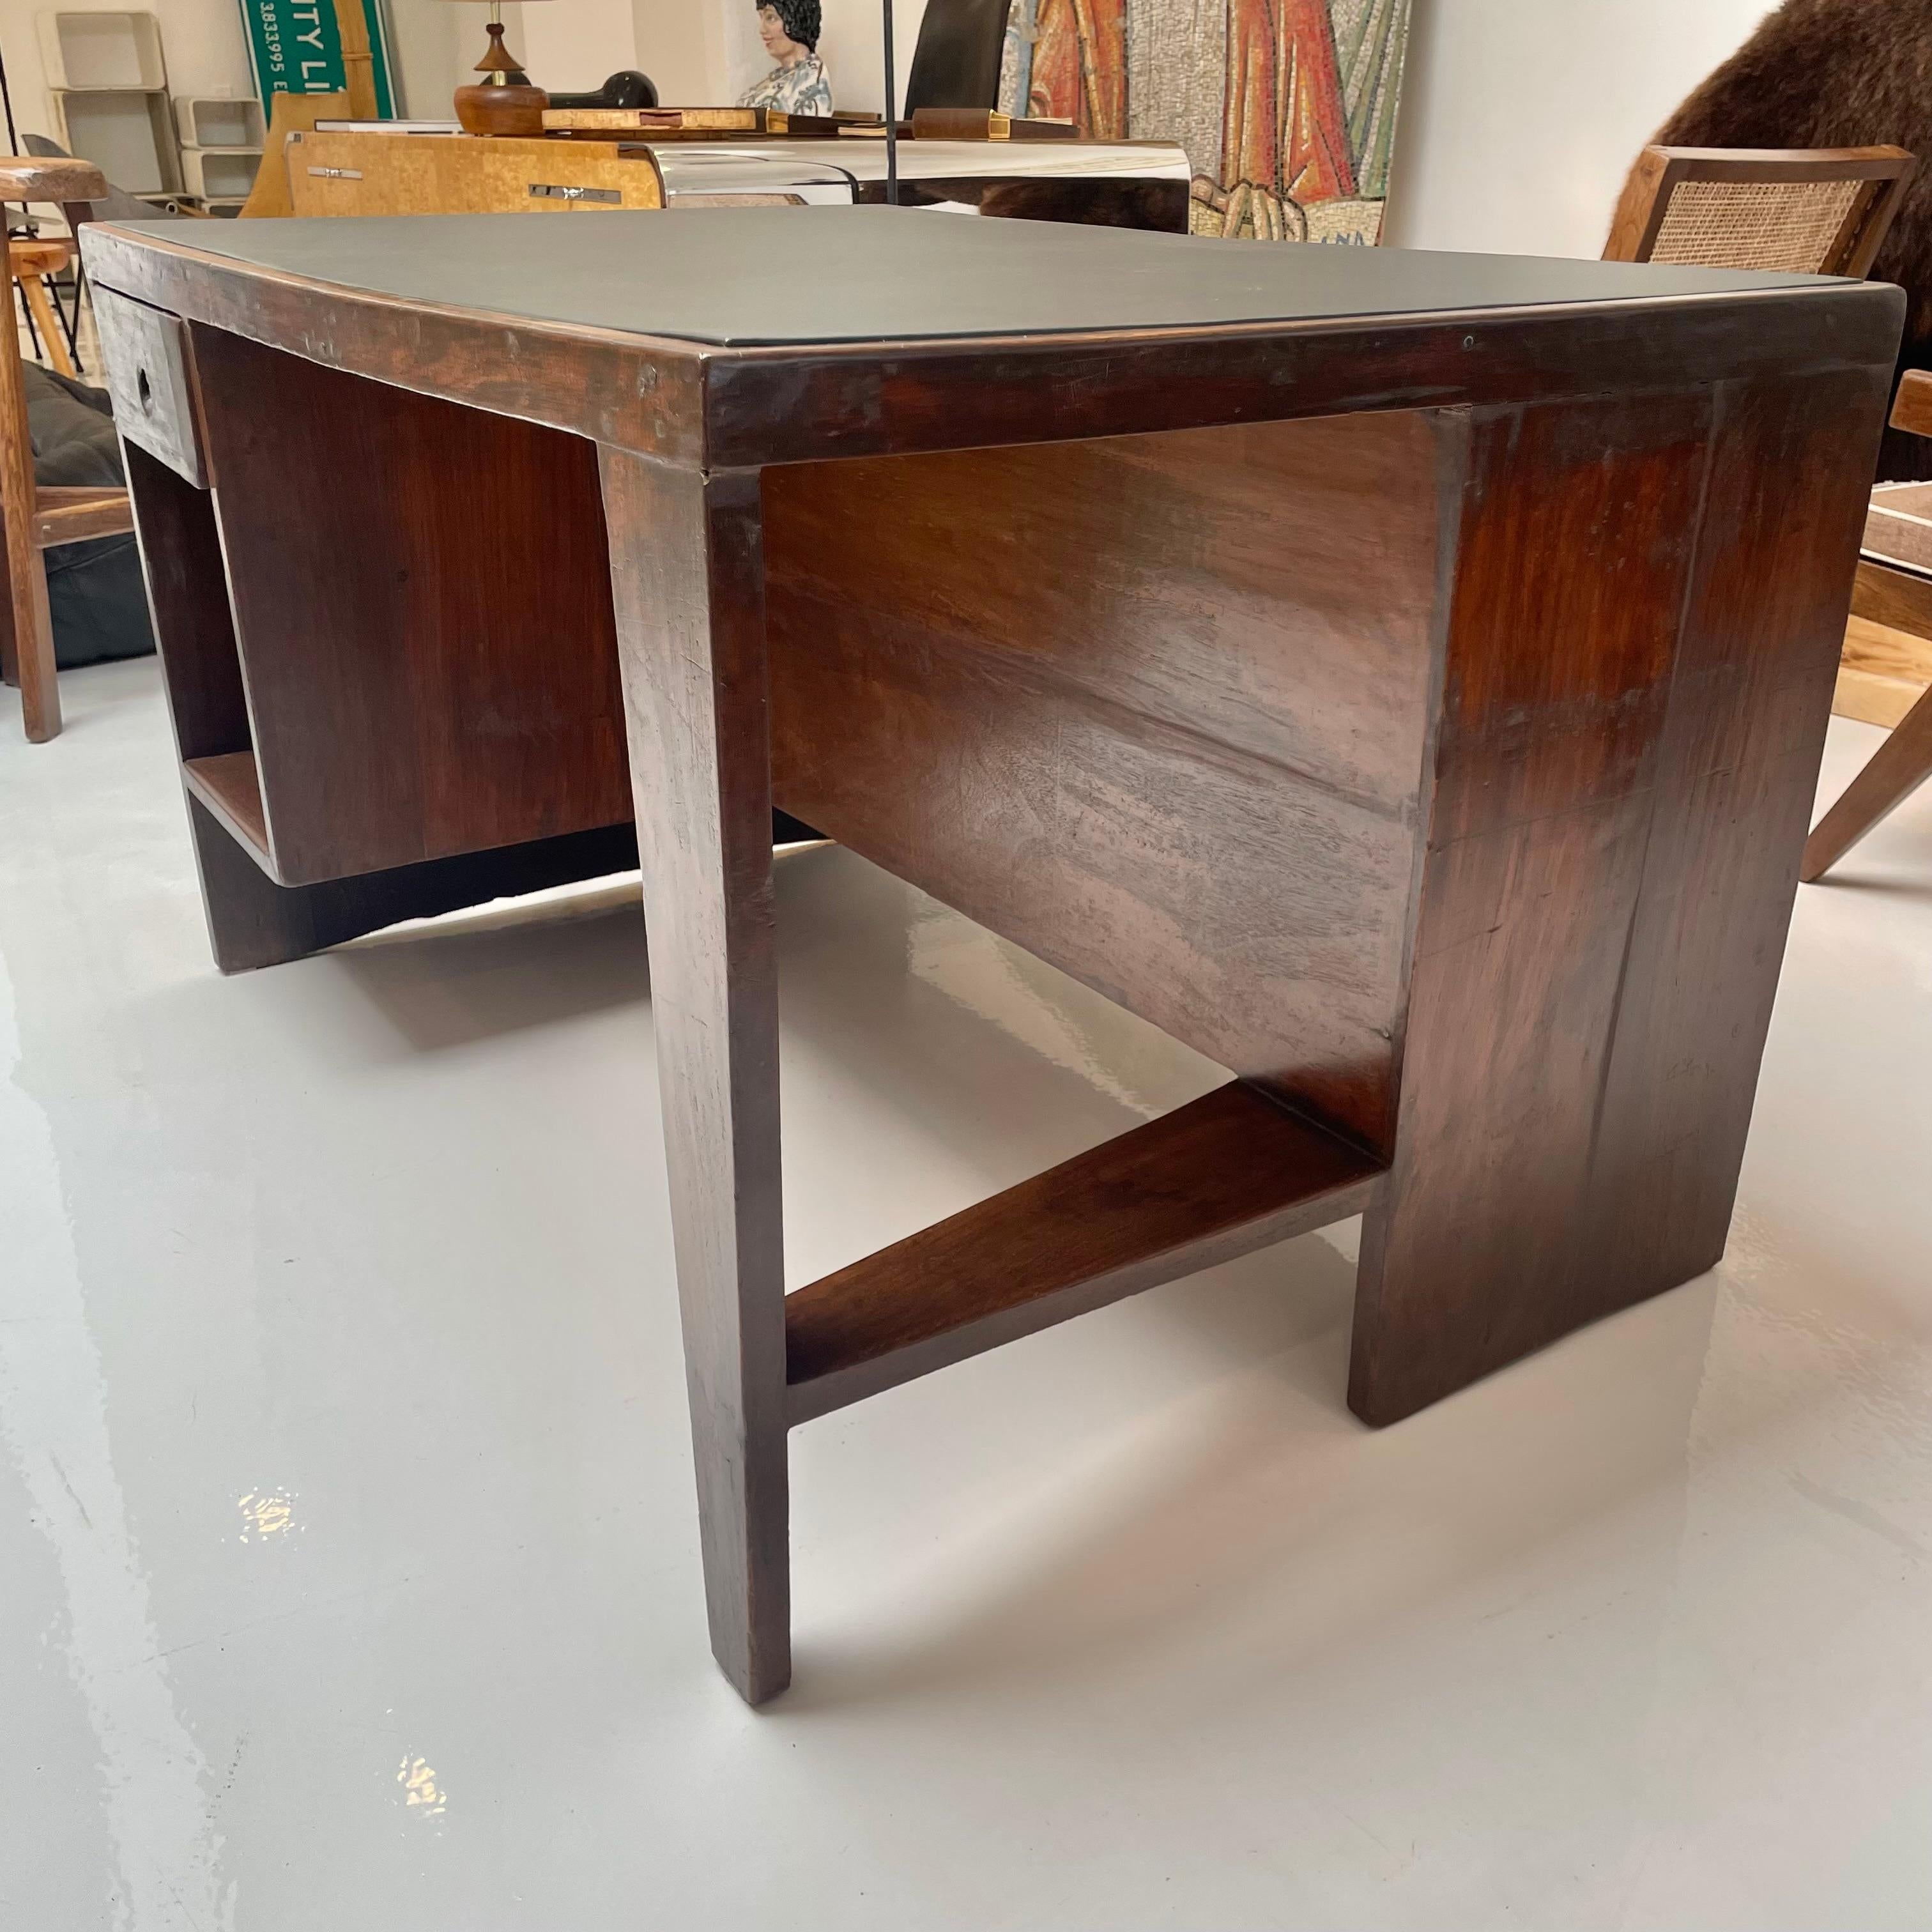 Mid-20th Century Pierre Jeanneret Desk, 1950s Chandigargh For Sale